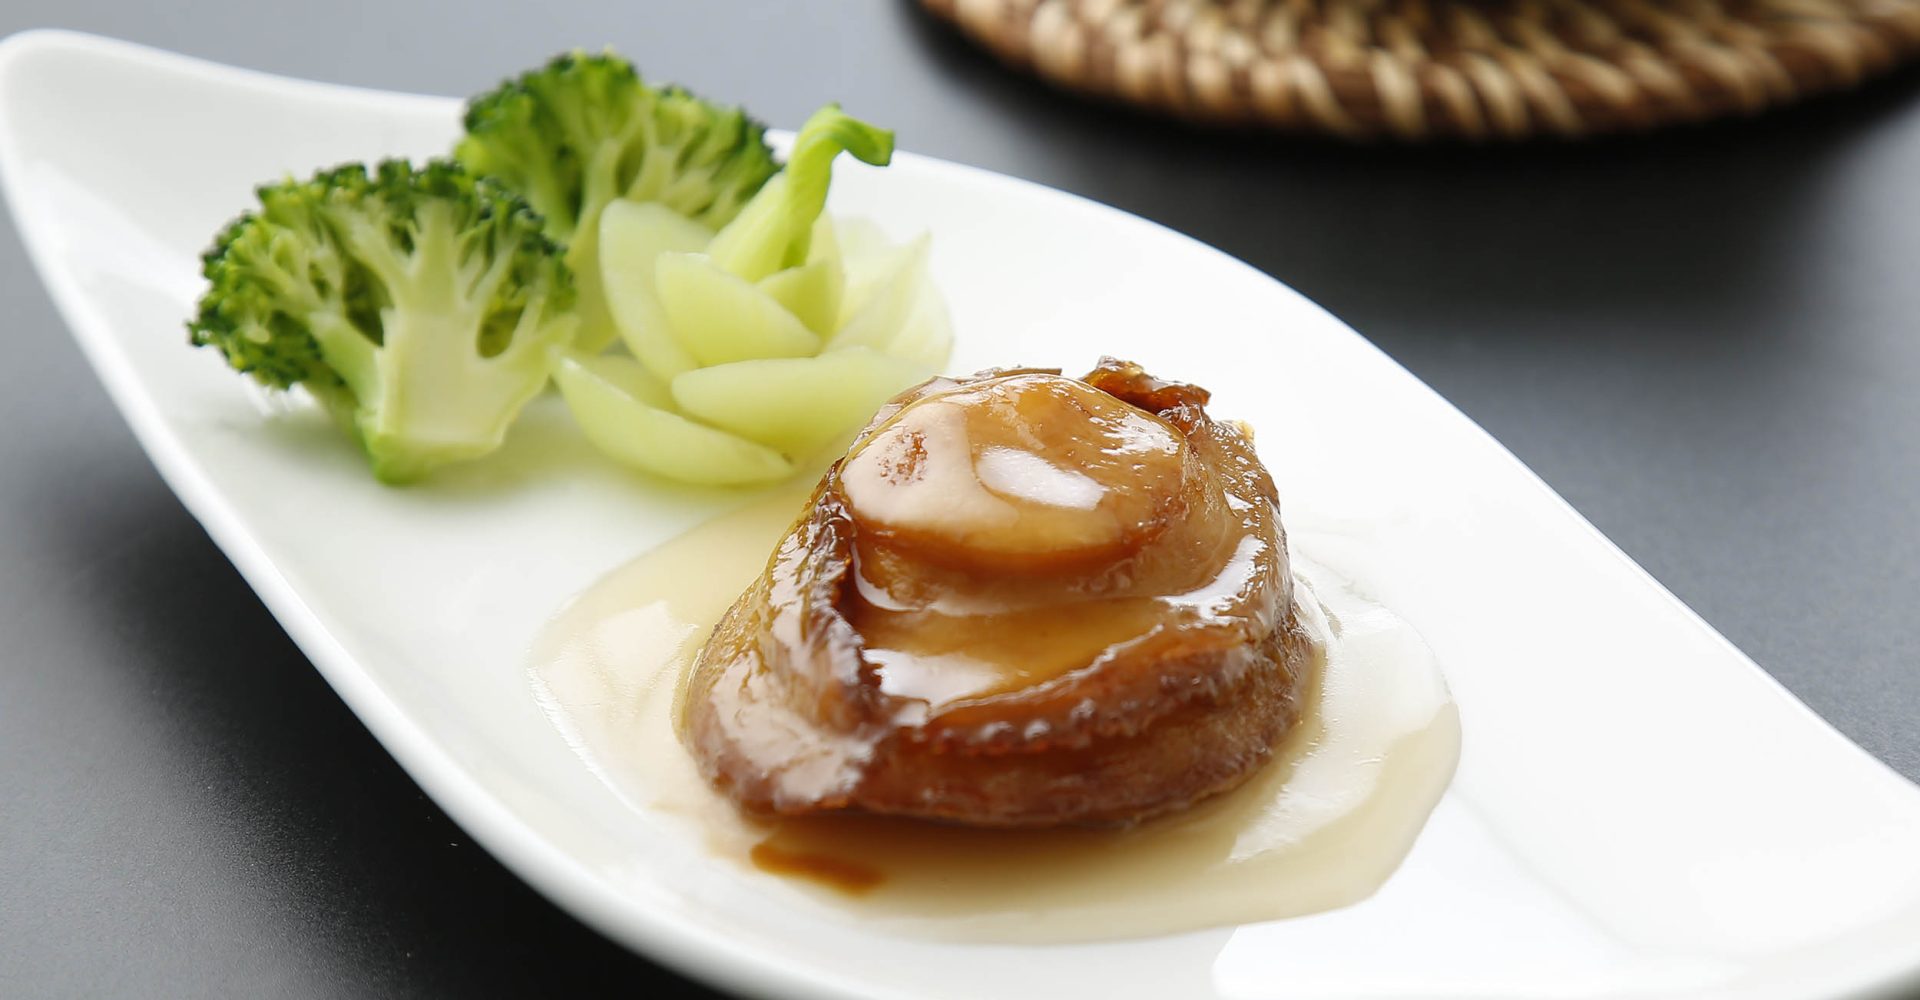 Braised 3-head abalone in superior sauce